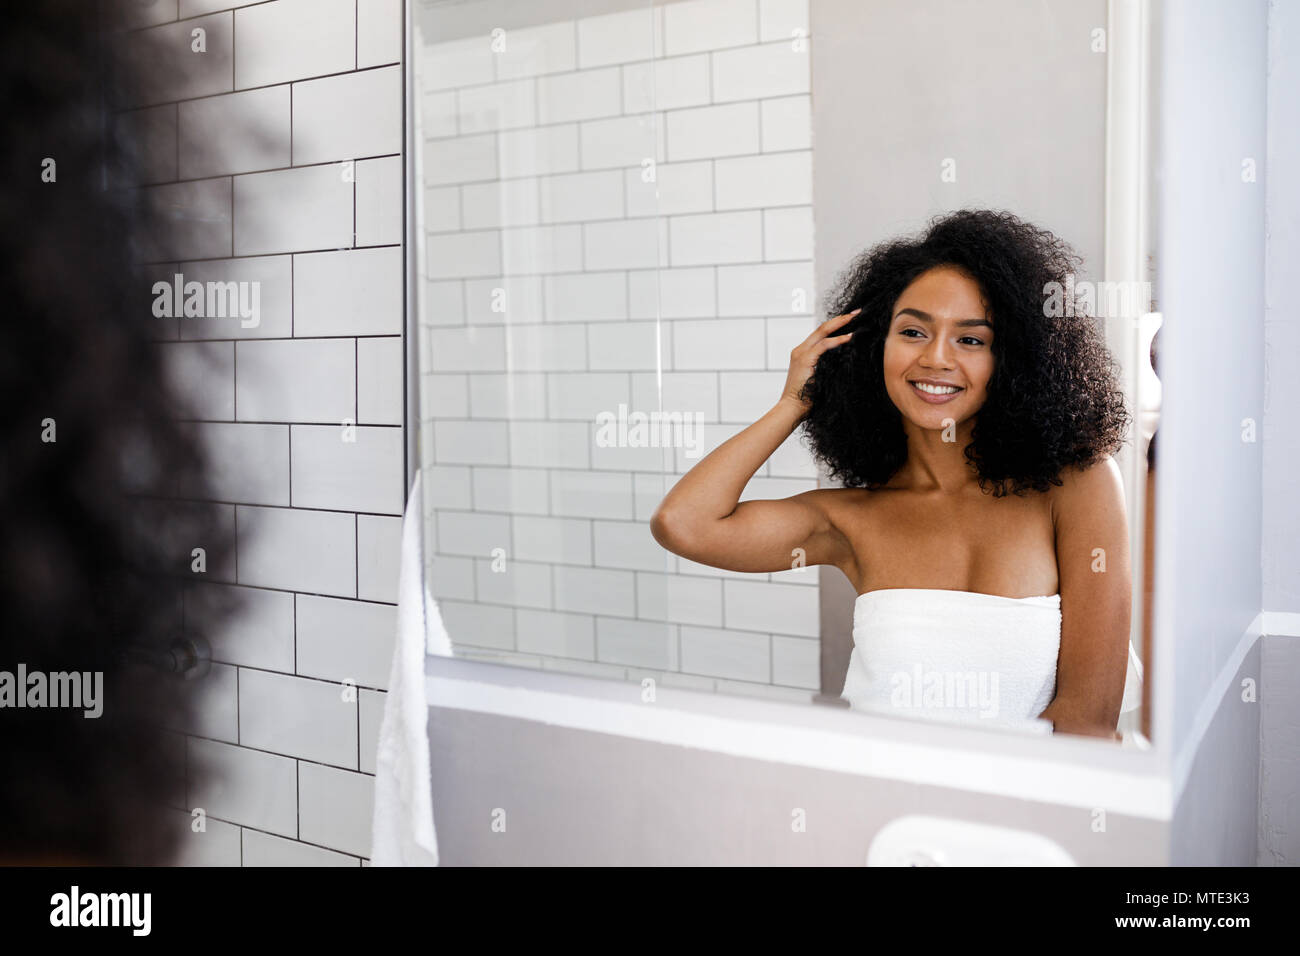 Shot of a young smiling woman deciding on a hair style in front of a mirror Stock Photo